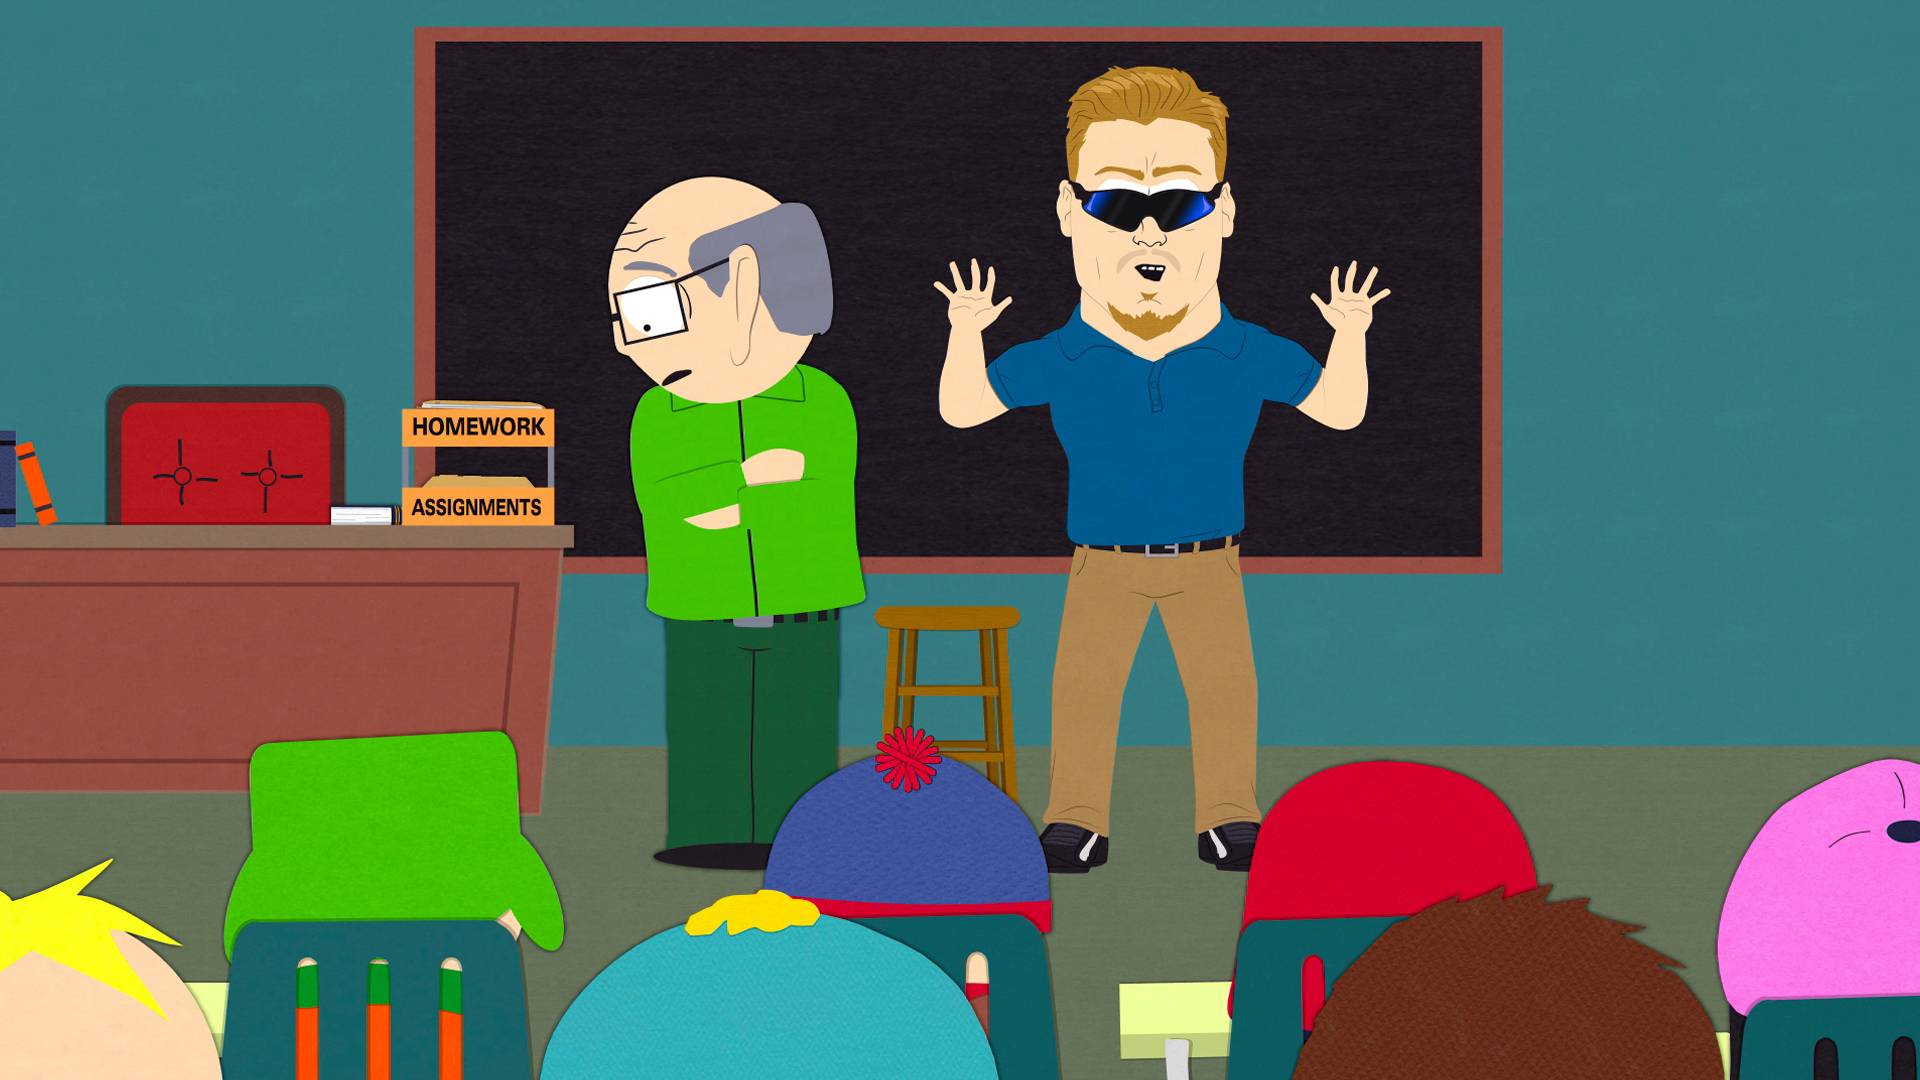 How Does 'South Park' Get Away with It? - The Peabody Awards